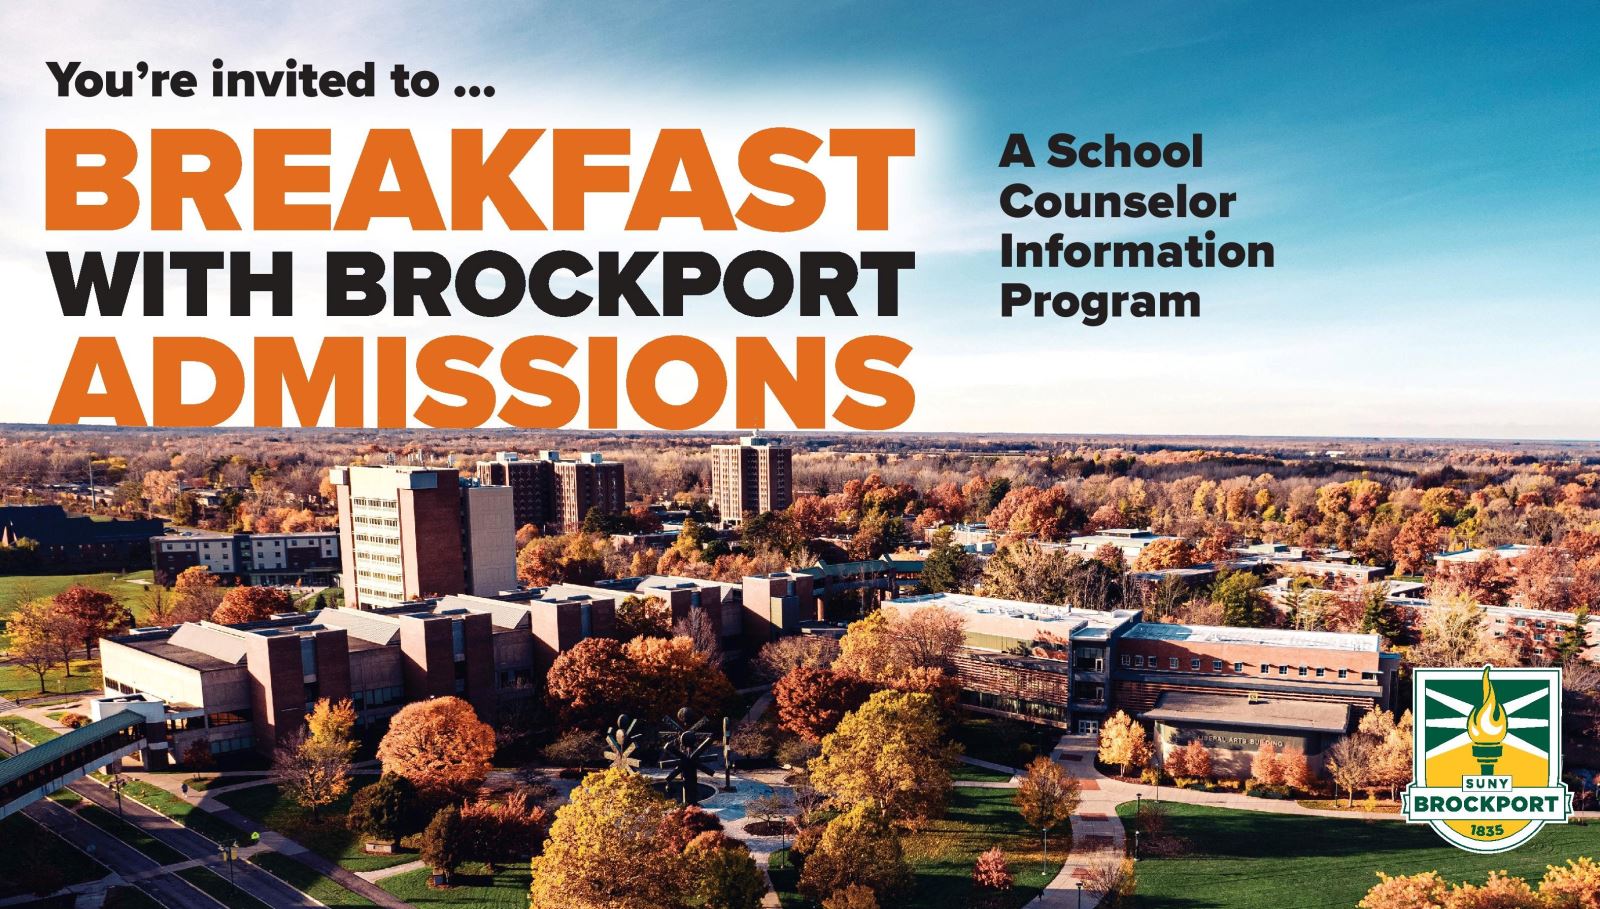 you're invited to breakfast with Brockport admissions, superimposed over an aerial view of brick buildings on a college campus